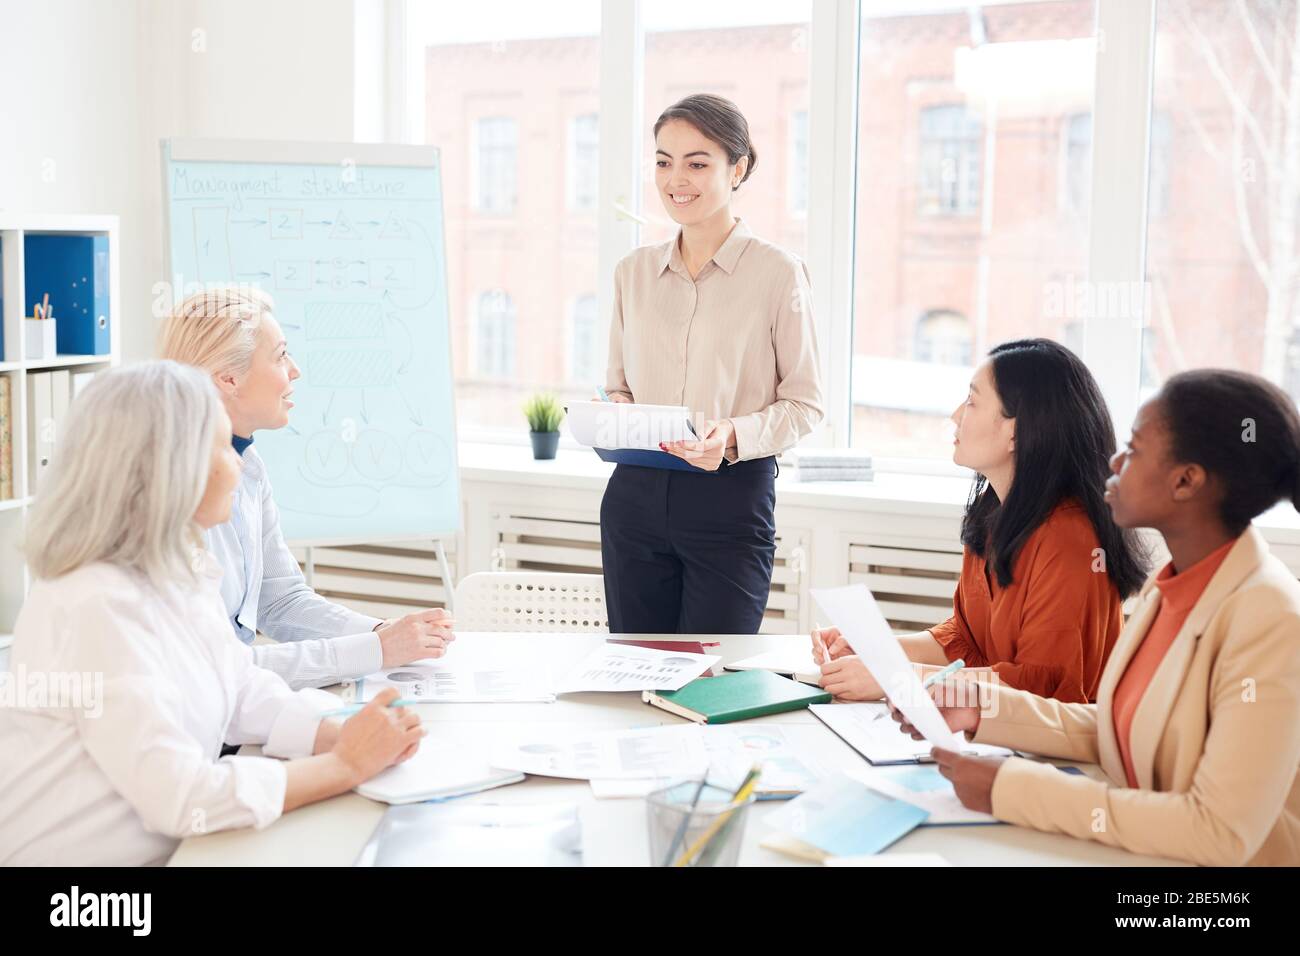 Portrait of smiling female manager presenting project plan to group of colleagues while standing by whiteboard during meeting in conference room, copy Stock Photo